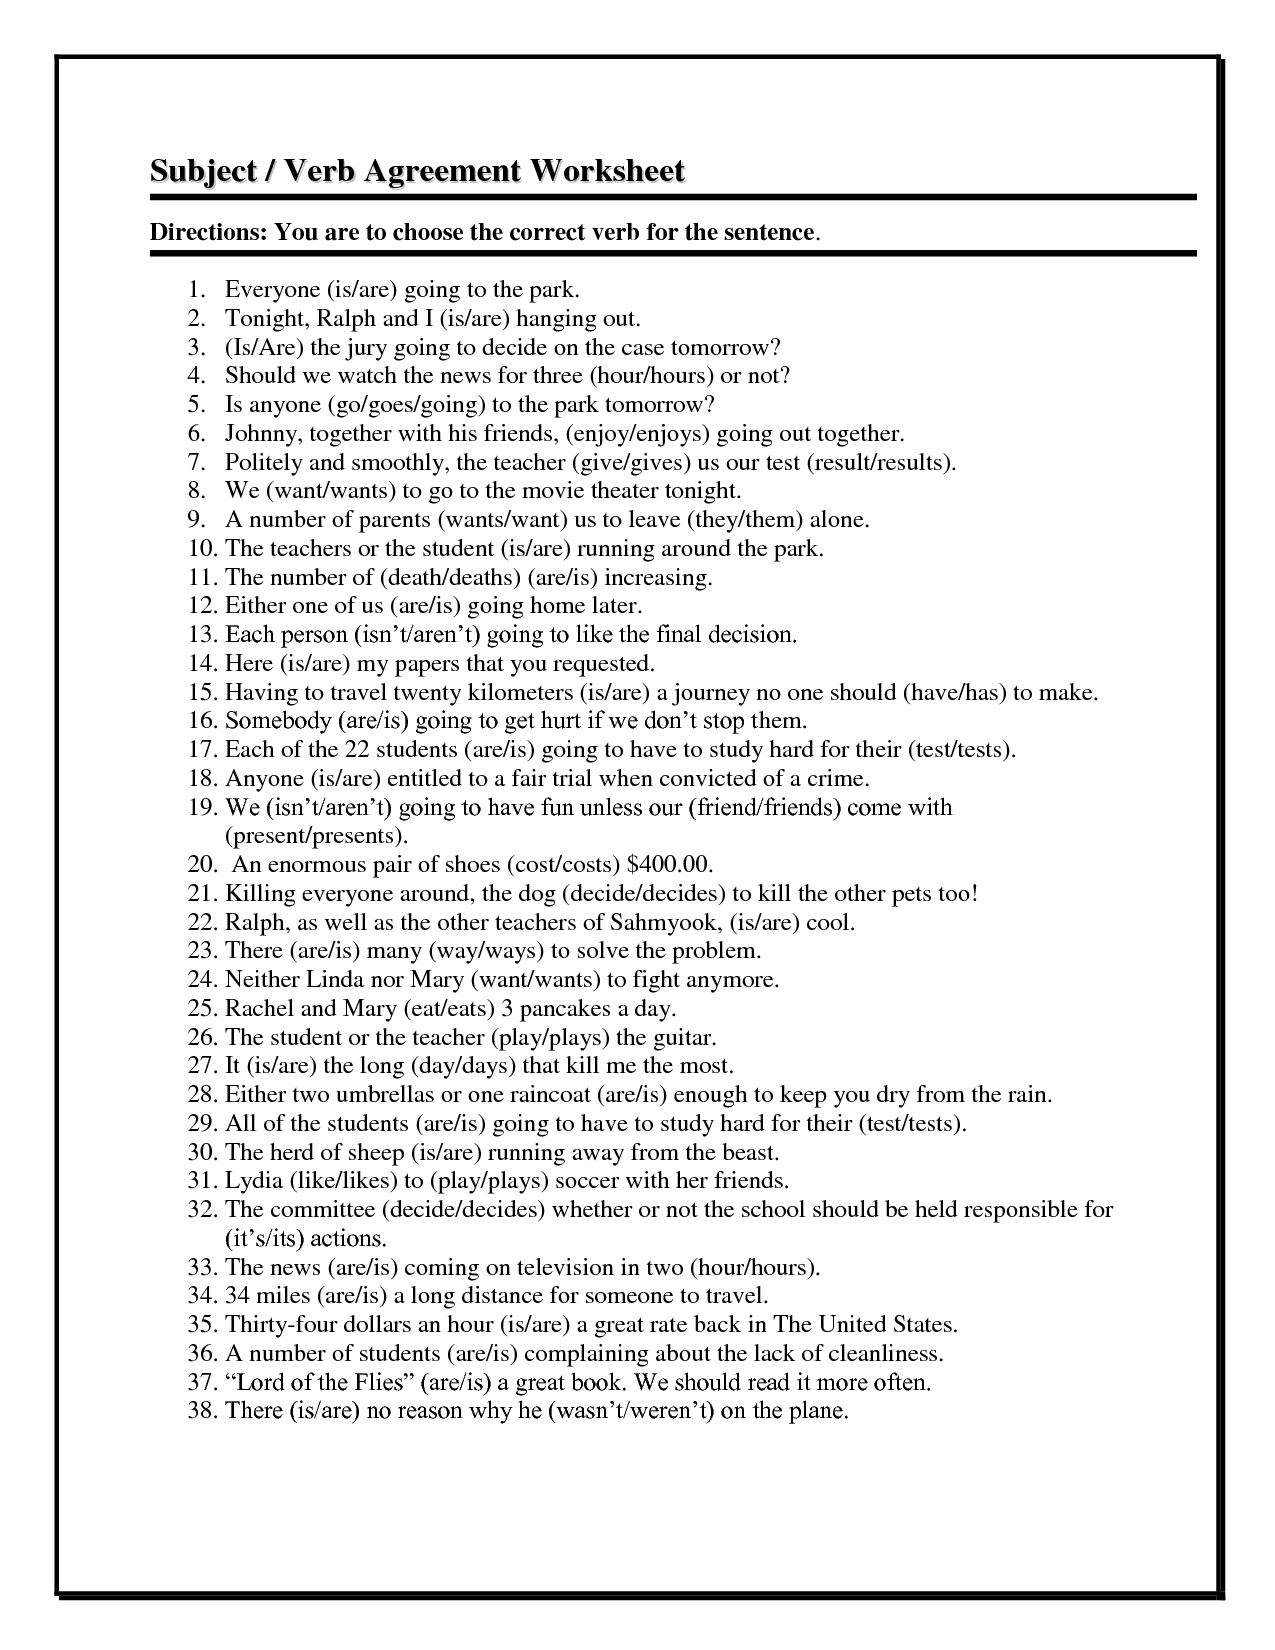 Subject Verb Agreement Practice 5th Grade 1000 Ideas About Subject Verb Agreement On Pinterest